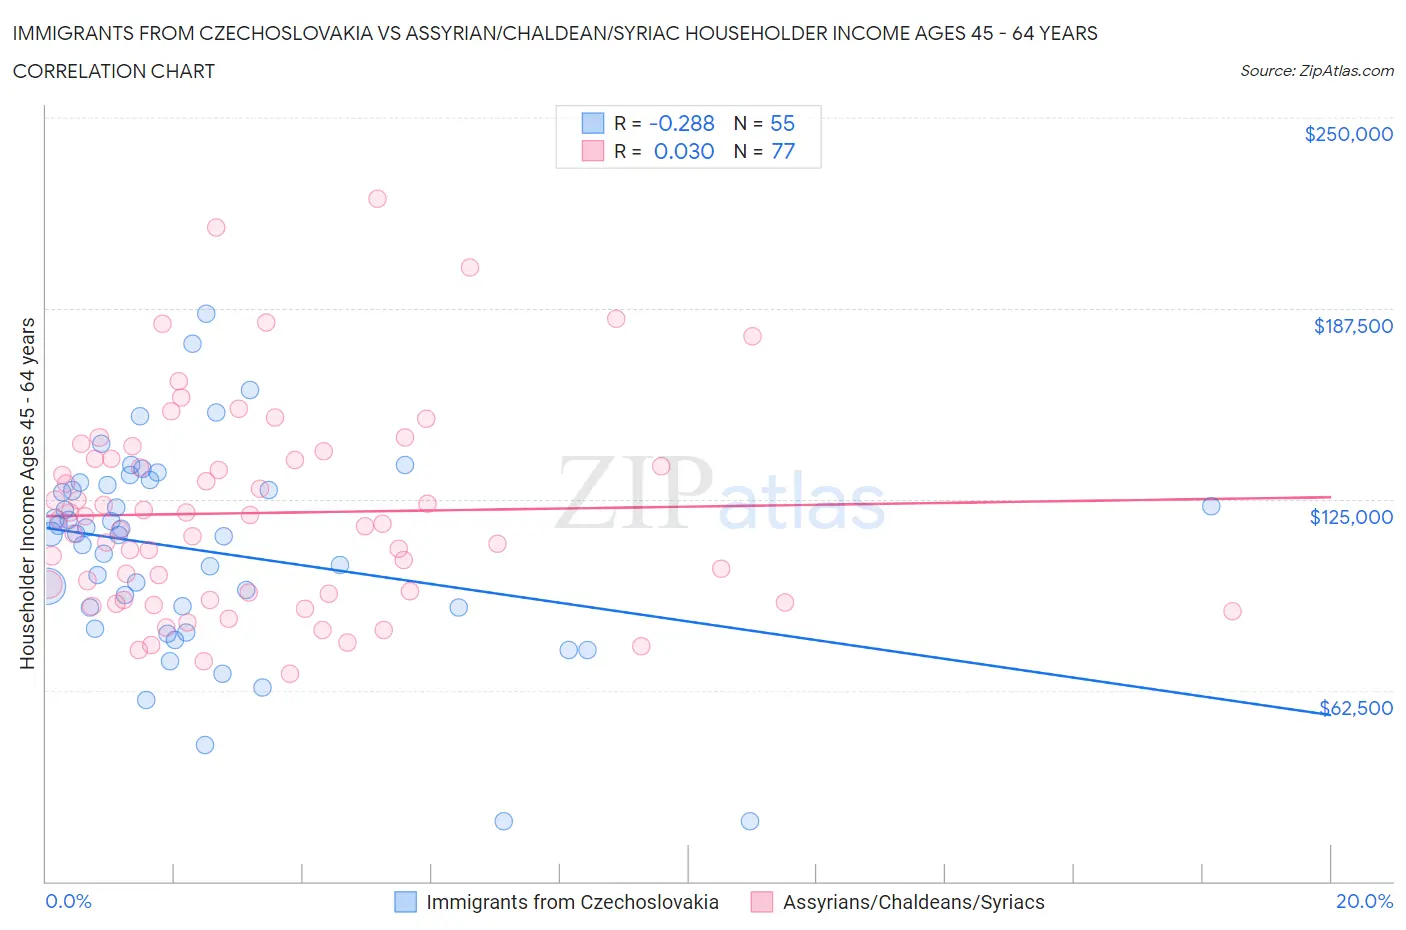 Immigrants from Czechoslovakia vs Assyrian/Chaldean/Syriac Householder Income Ages 45 - 64 years